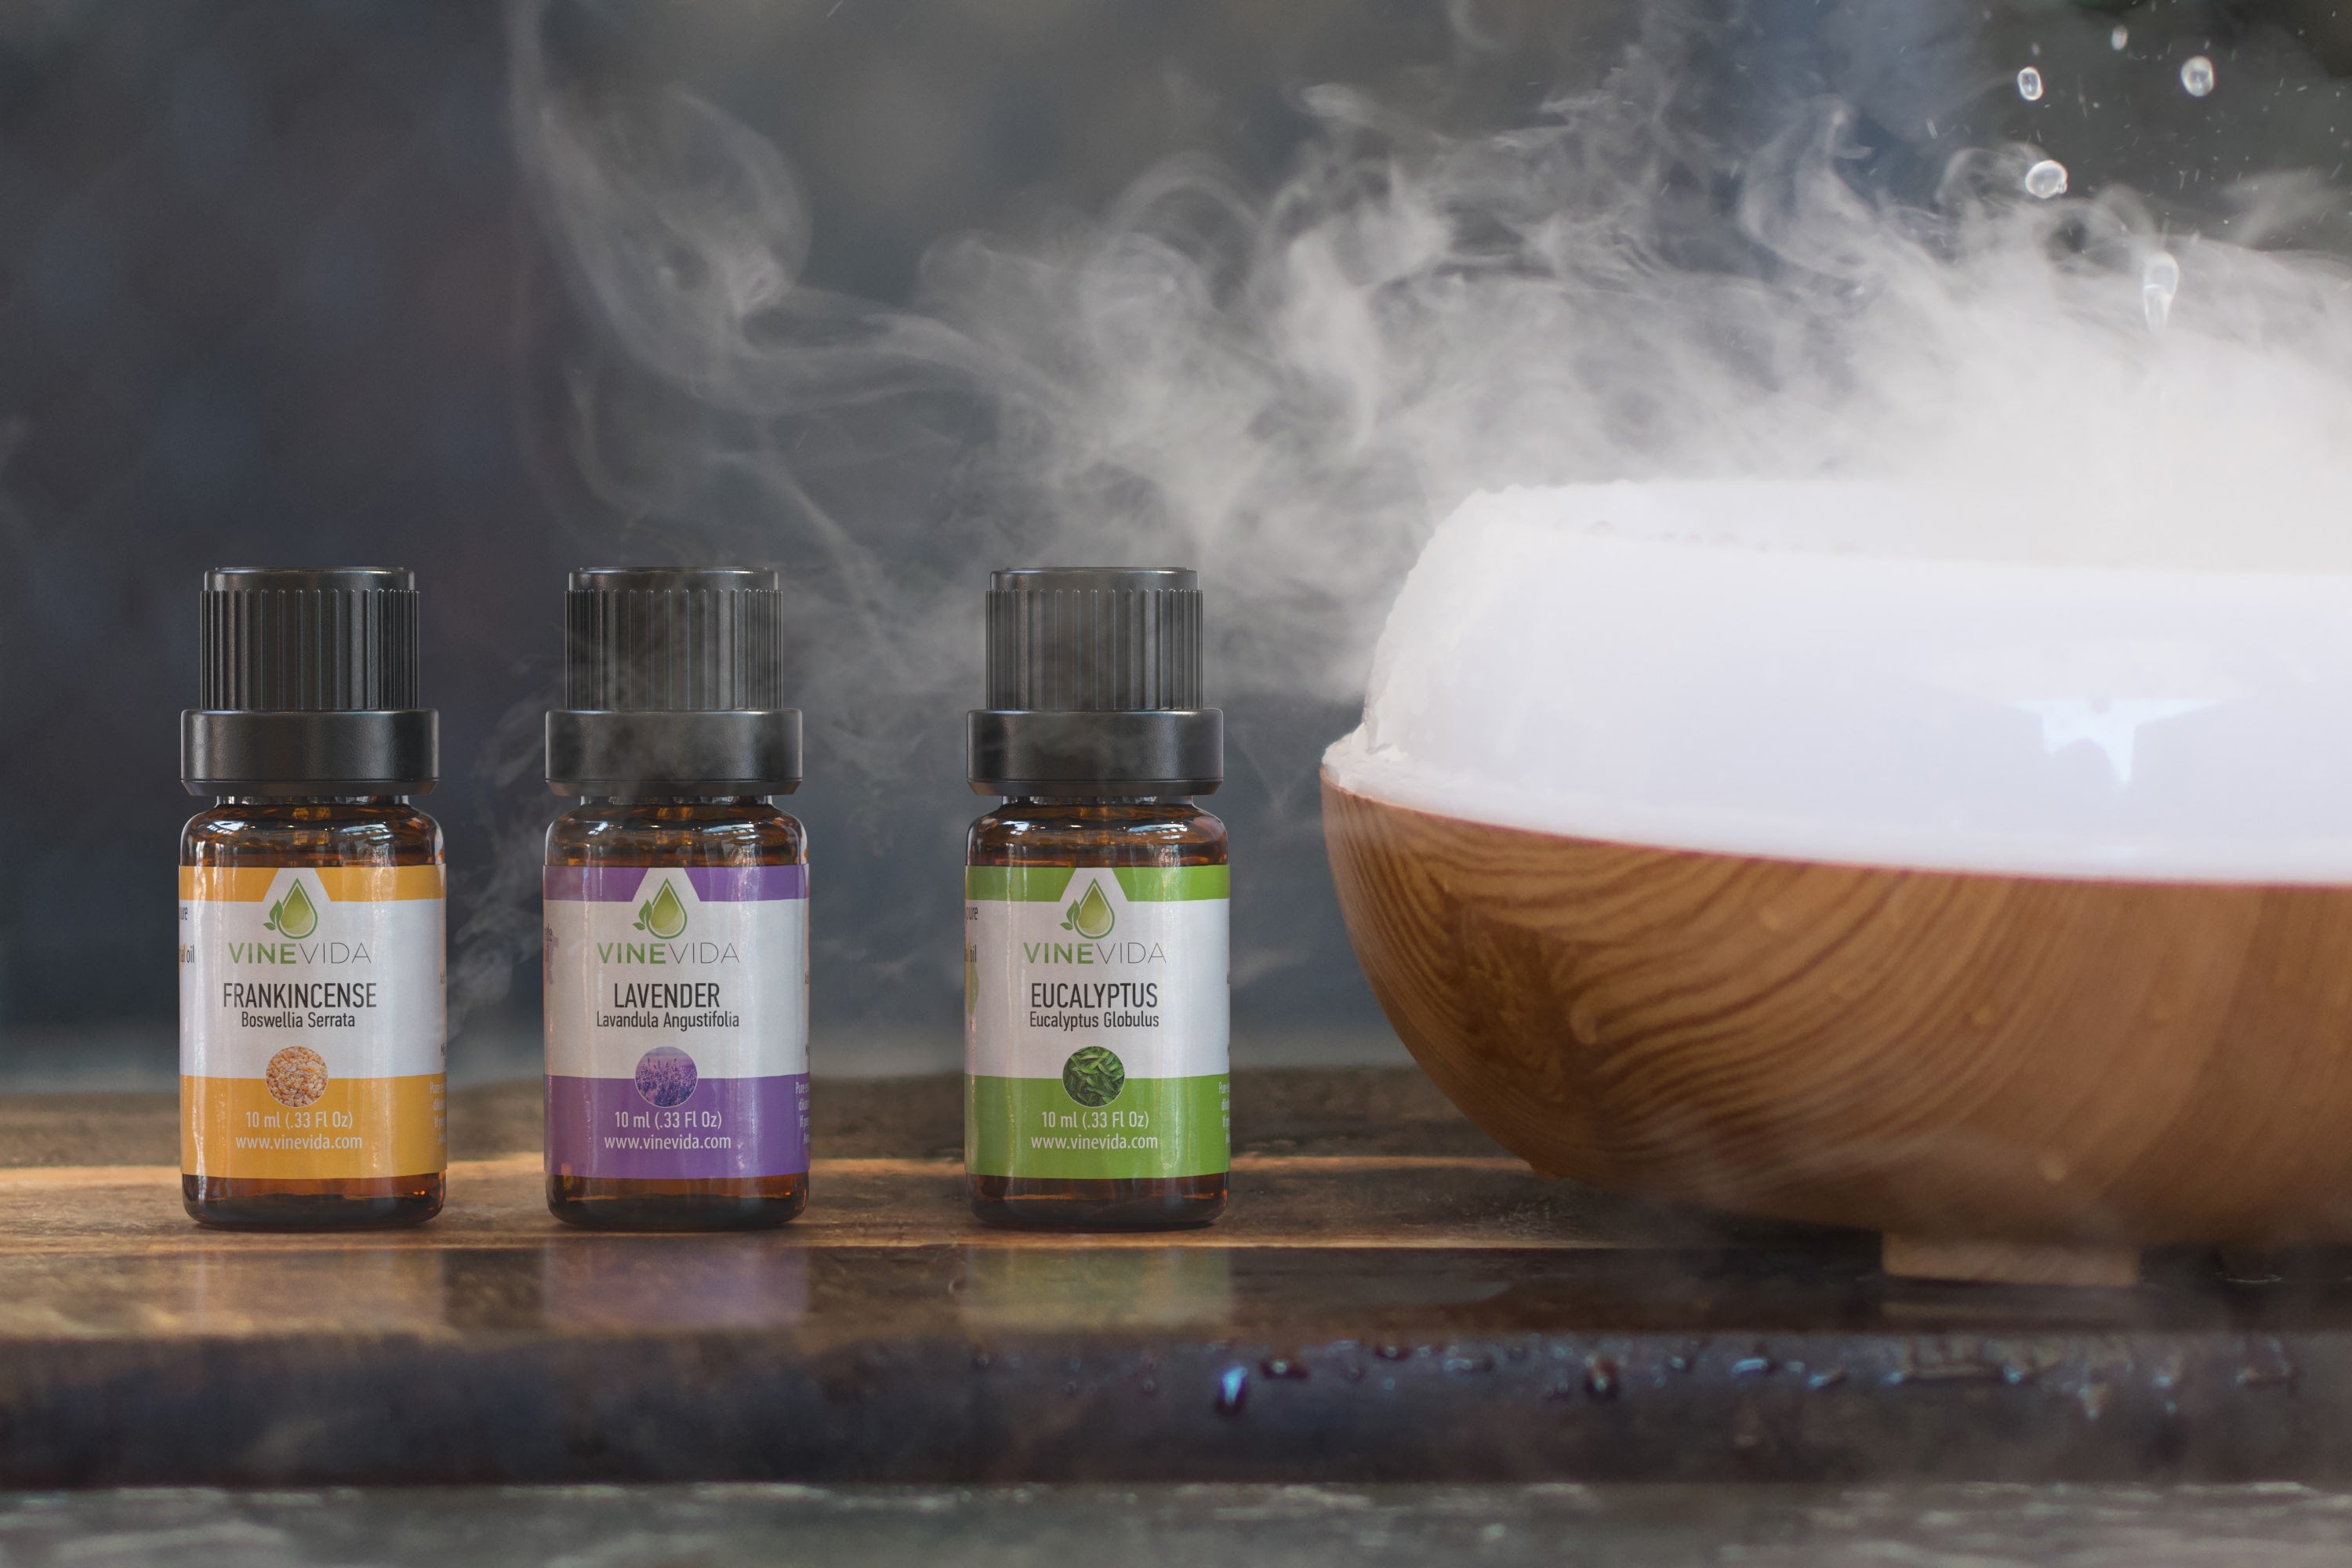 How To Do Aromatherapy At Home: A Beginners Guide